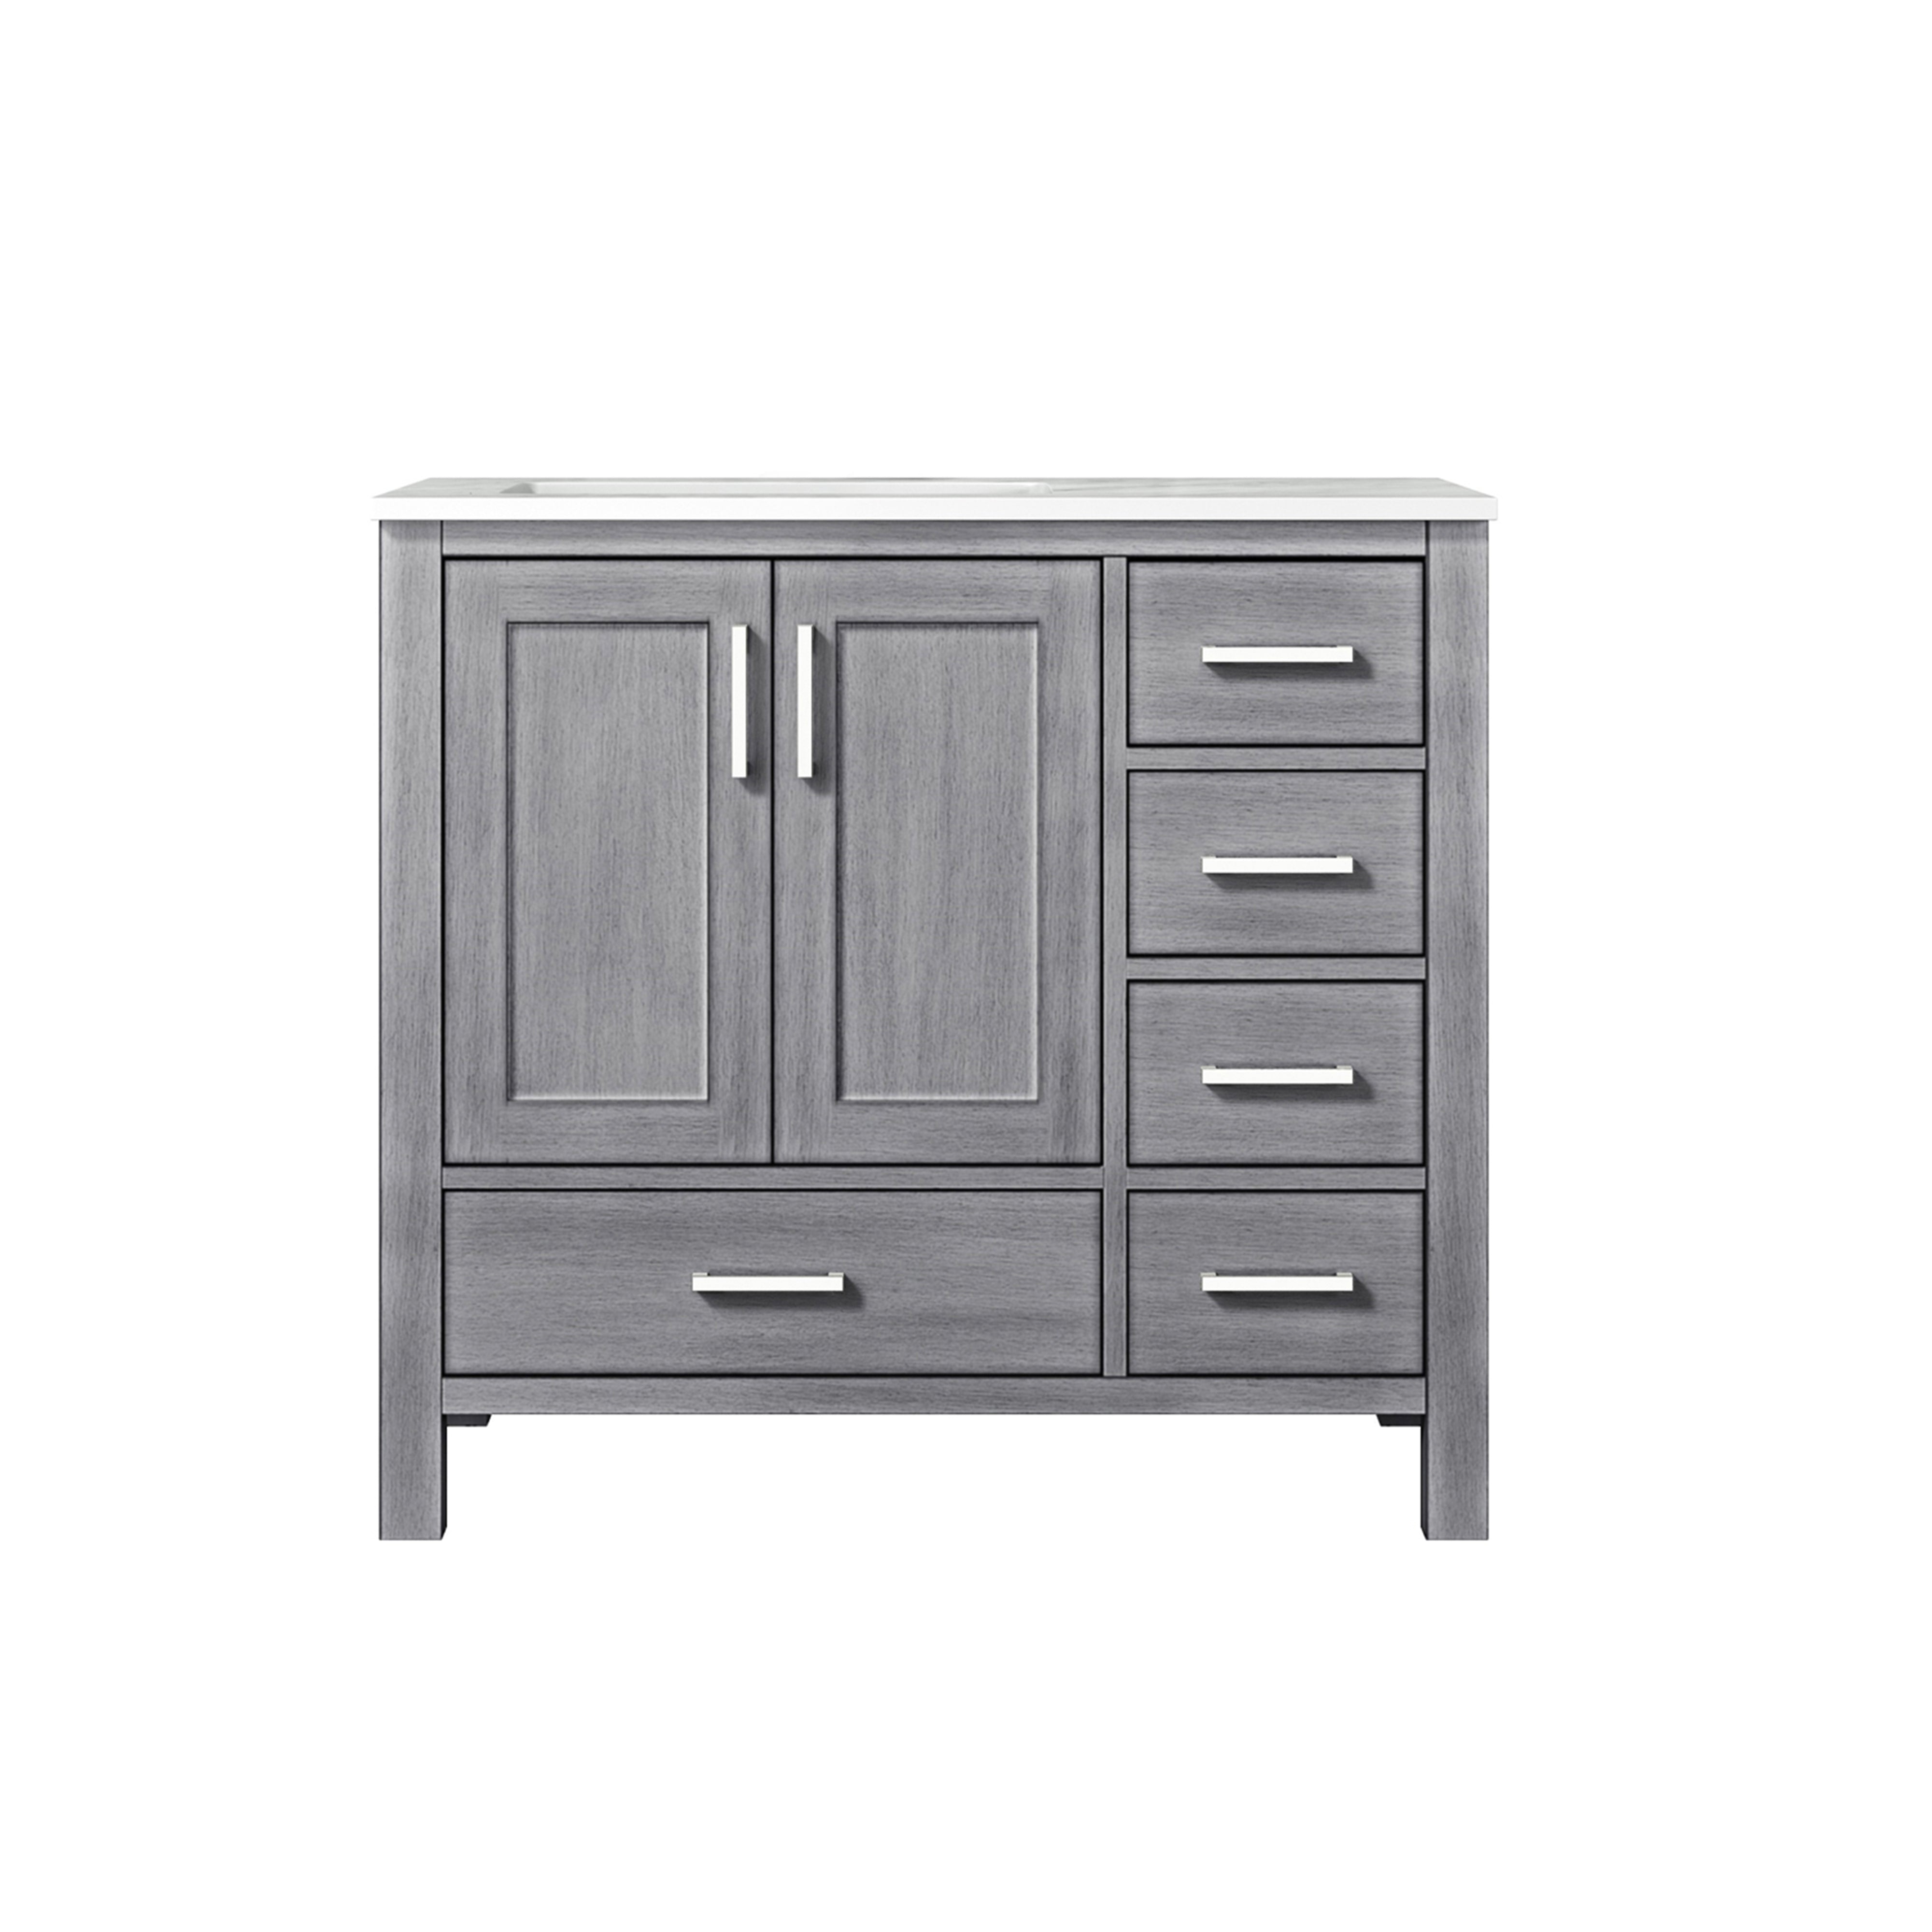 Lexora Jacques LJ342236SDDS000-L 36" Single Bathroom Vanity in Distressed Grey with White Carrara Marble, White Rectangle Sink on Left, Front View